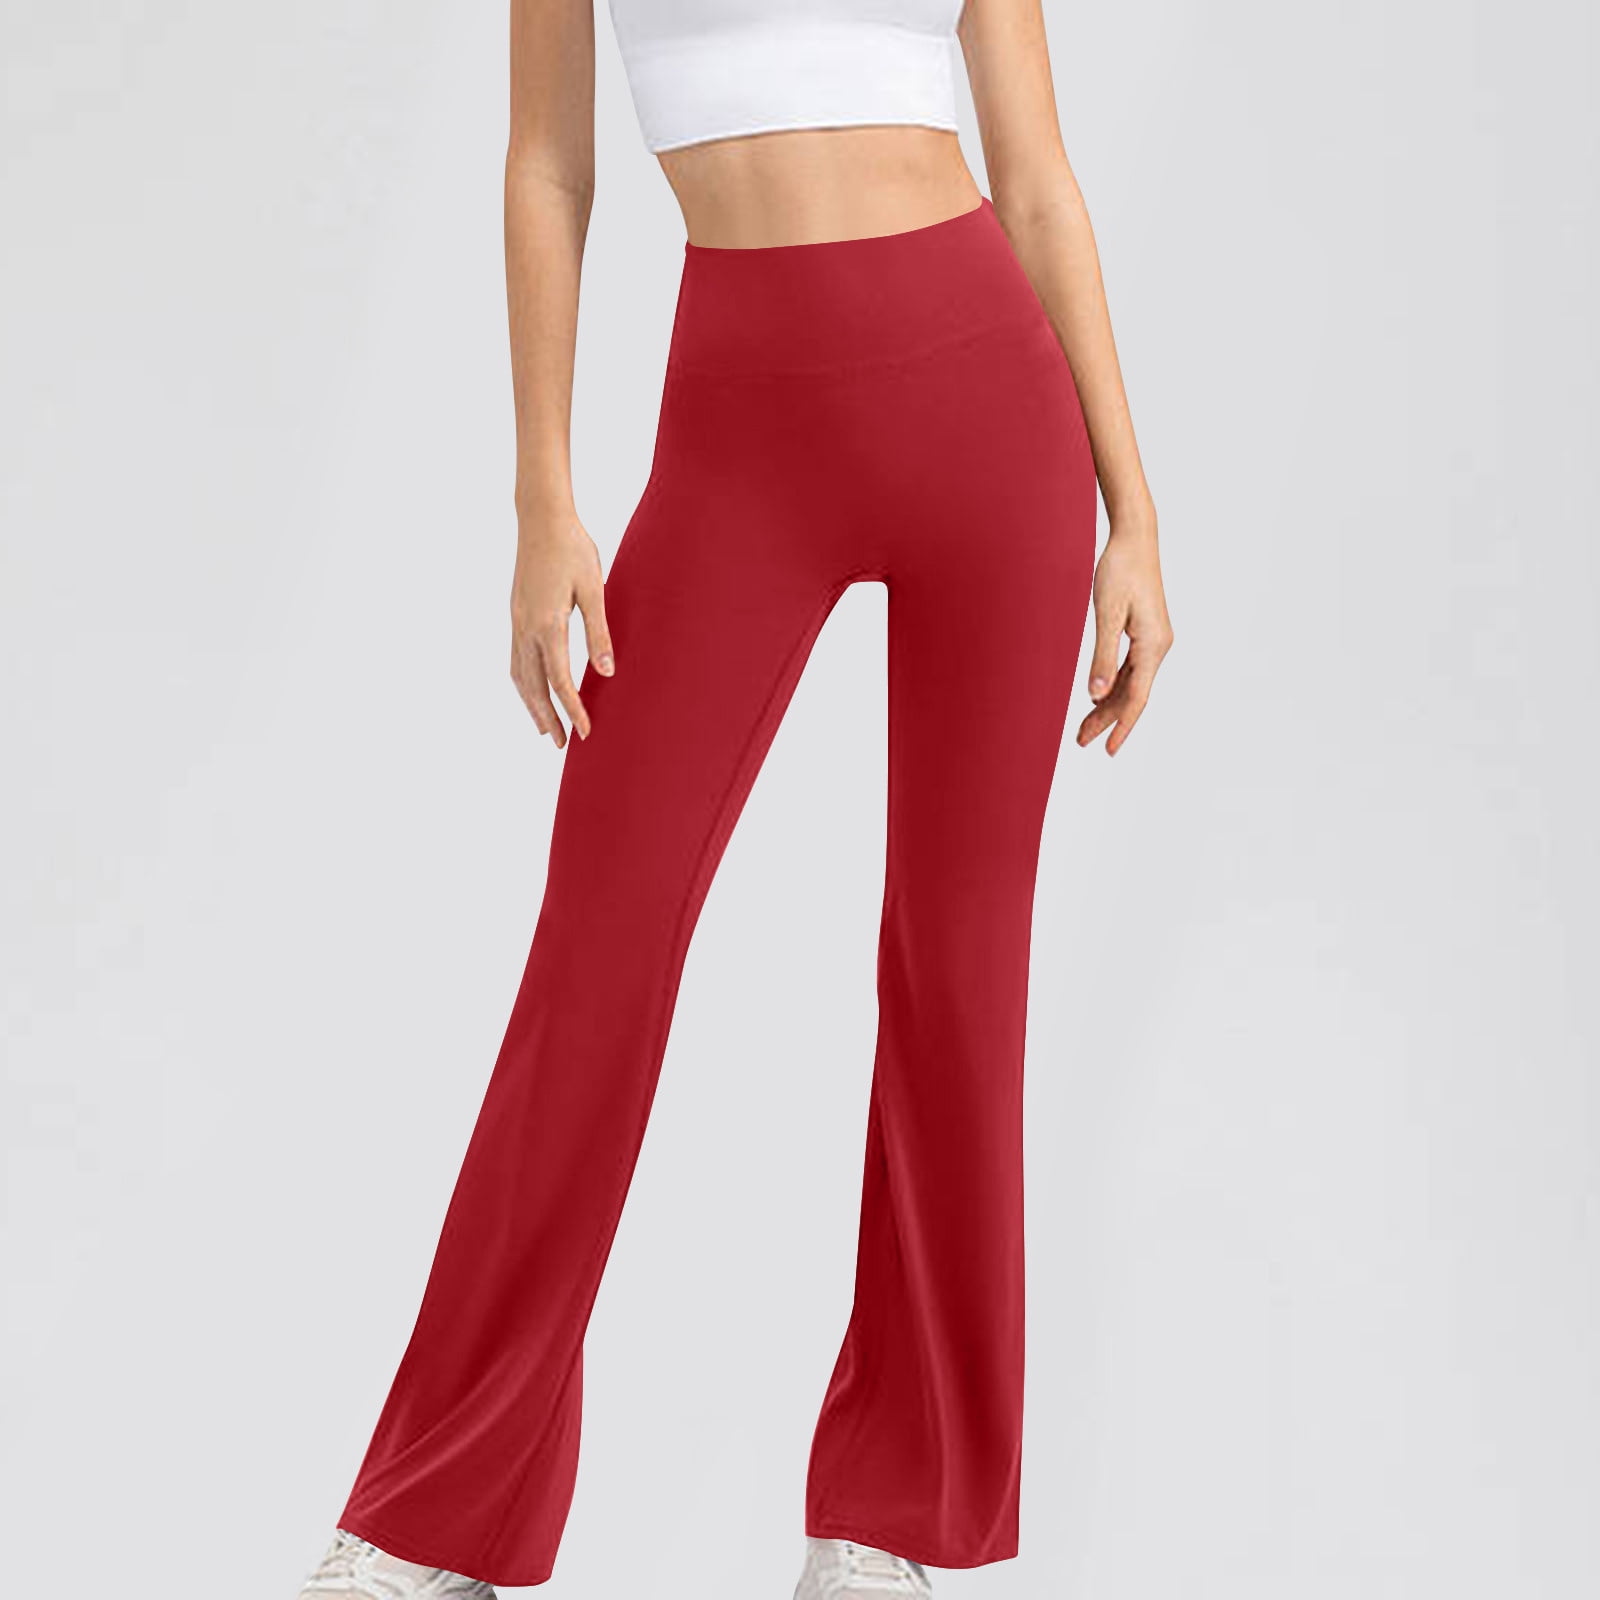 Herrnalise 28/30/32/34 Inseam Women's Bootcut Yoga Pants Long Bootleg  High-Waisted Flare Pants with Pockets Red-L